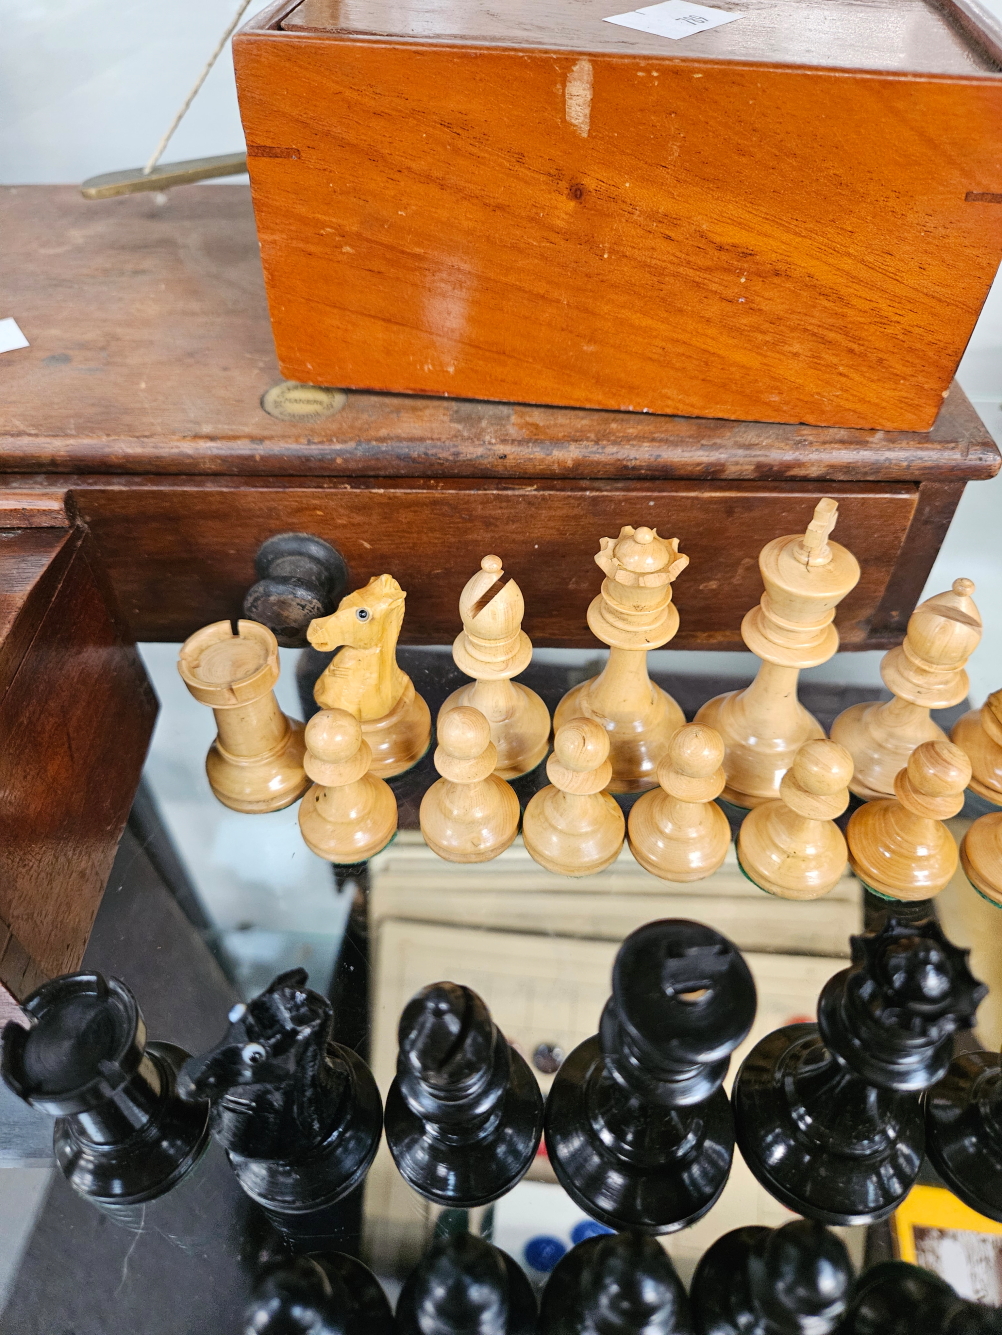 A BOXED WOODEN STAUNTON CHESS SET, BOXED DRAUGHTSMEN AND A SET OF SCALES - Image 9 of 9